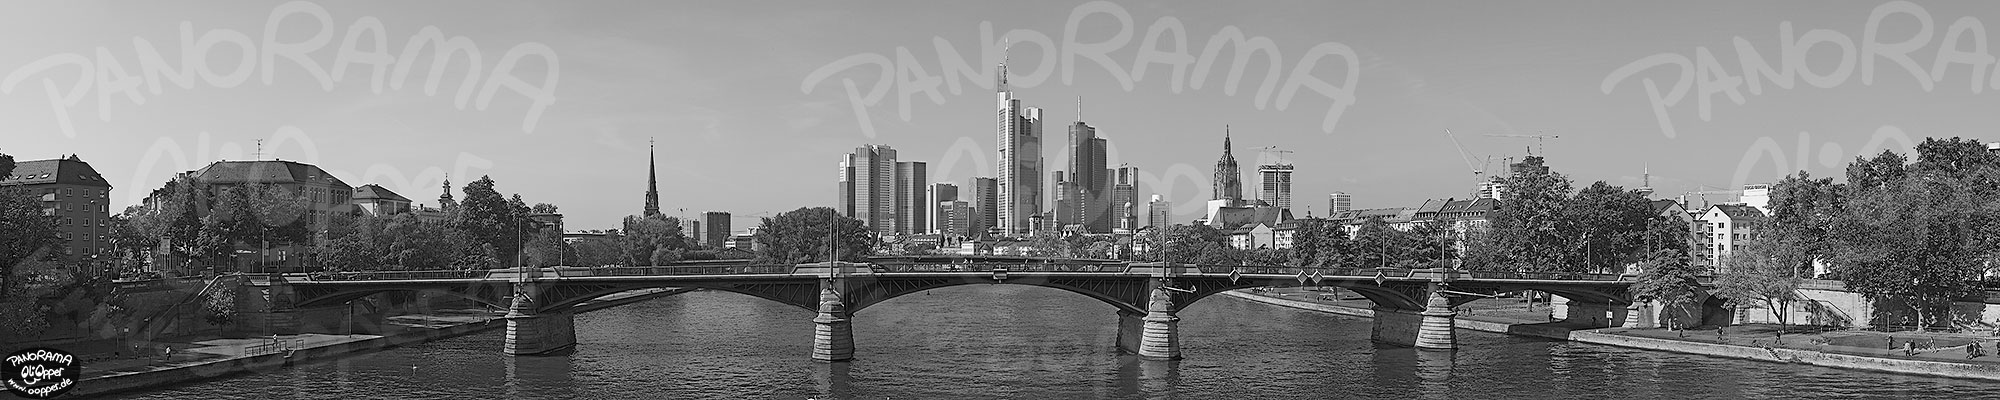 Panorama Frankfurt - Skyline am Tag - p8308 - (c) by Oliver Opper